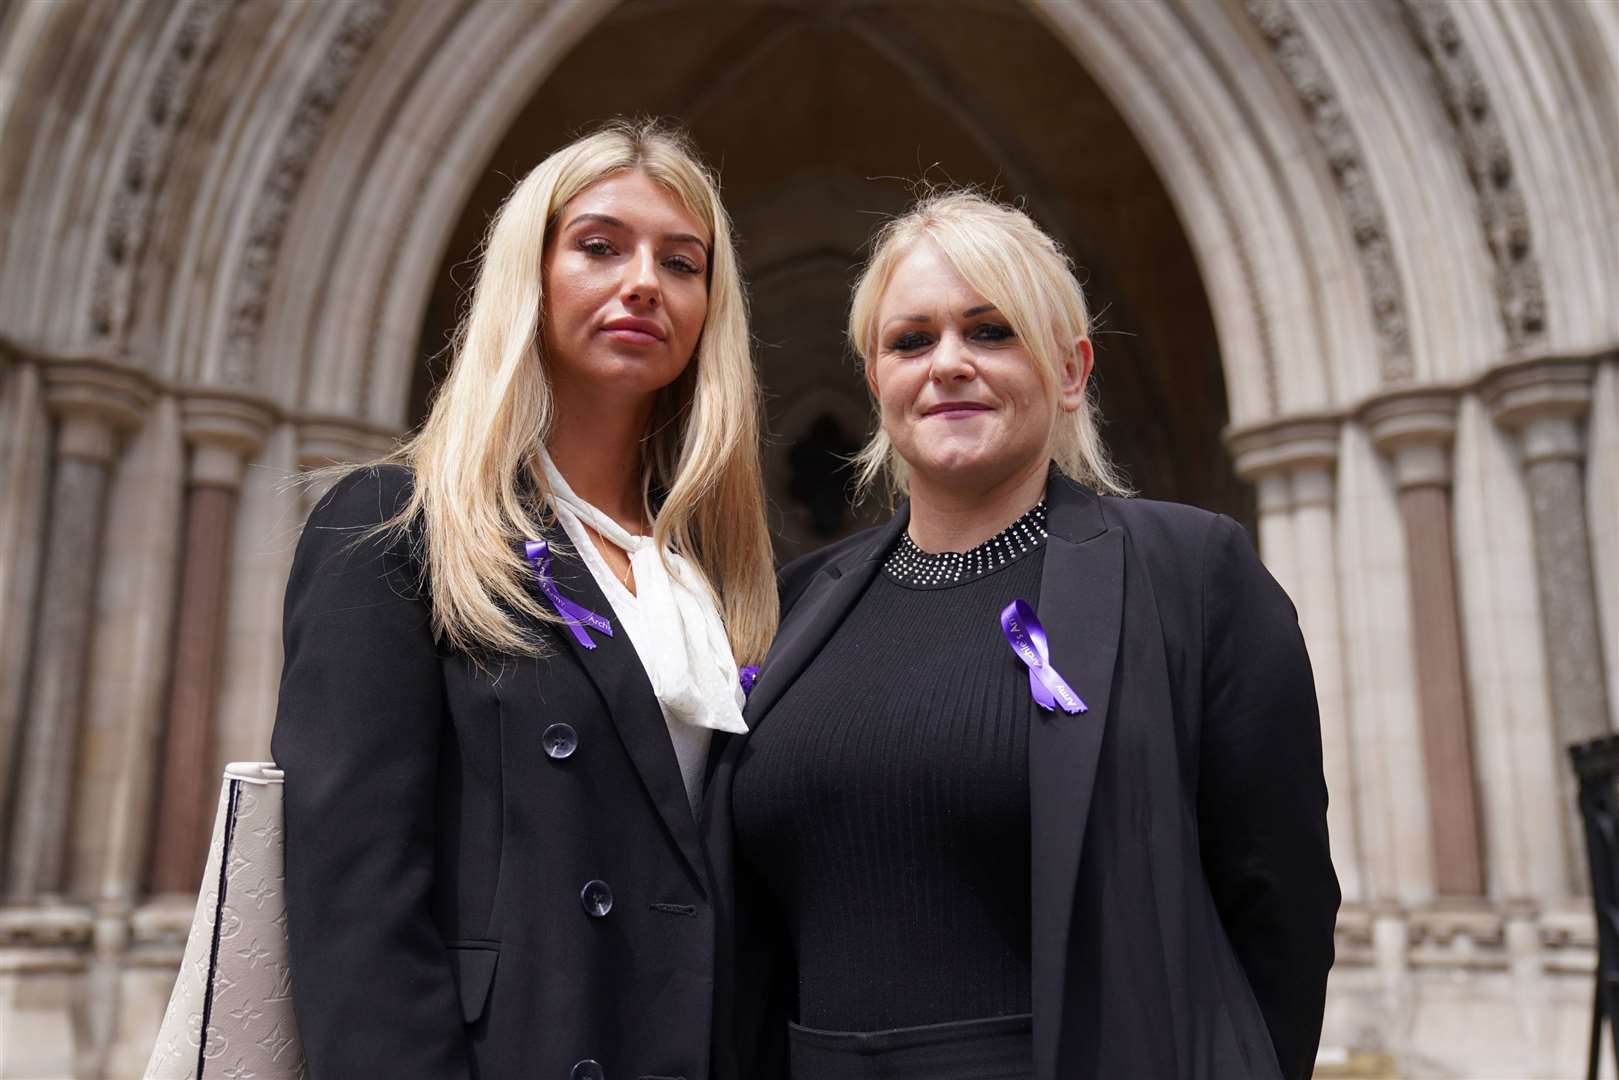 Archie Battersbee’s mother Hollie Dance (right) and family friend Ella Carter, outside the High Court during an earlier hearing (PA)